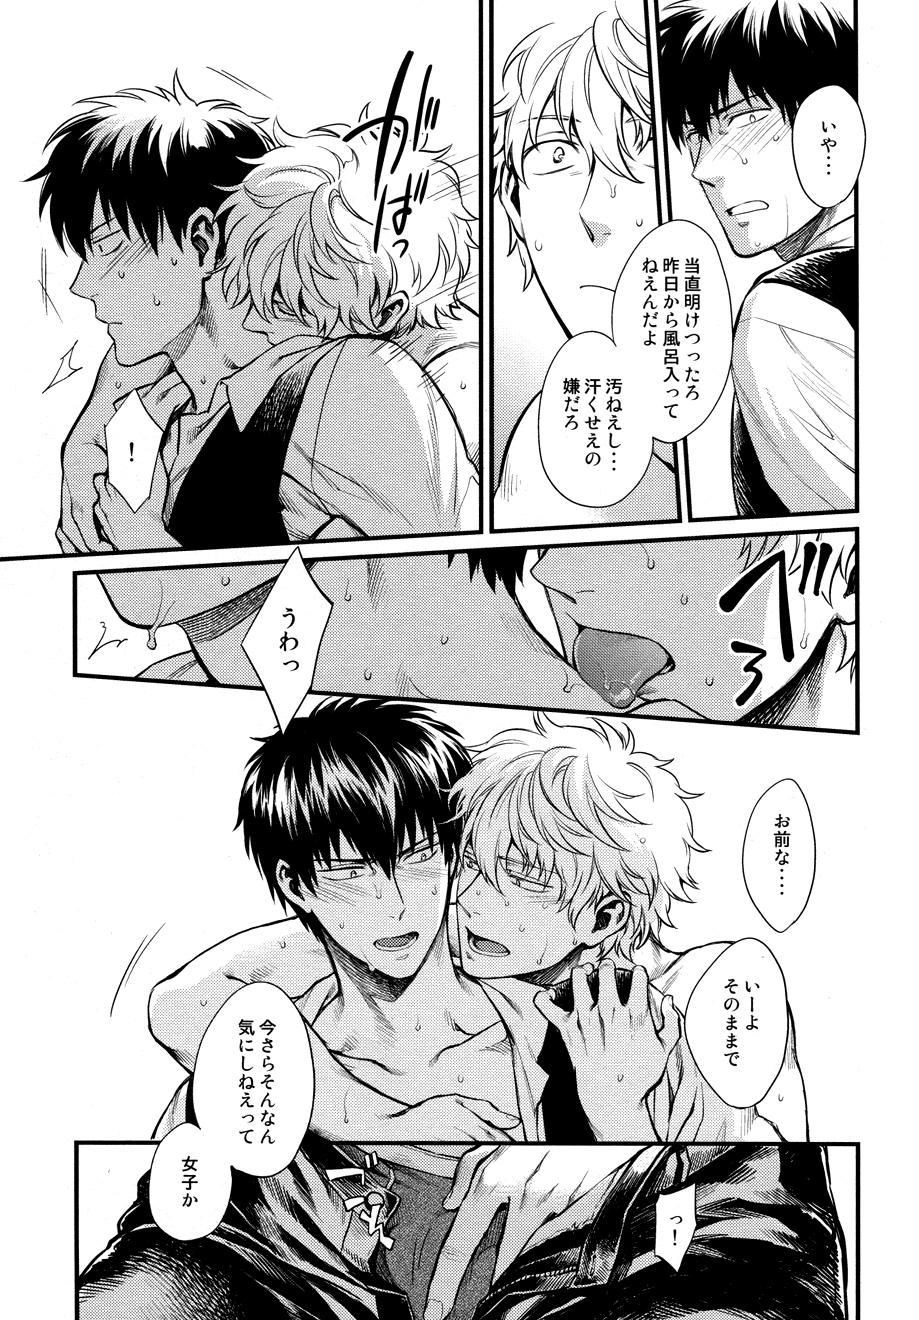 Gayfuck Dance on a SultryDay - Gintama Uncensored - Page 11